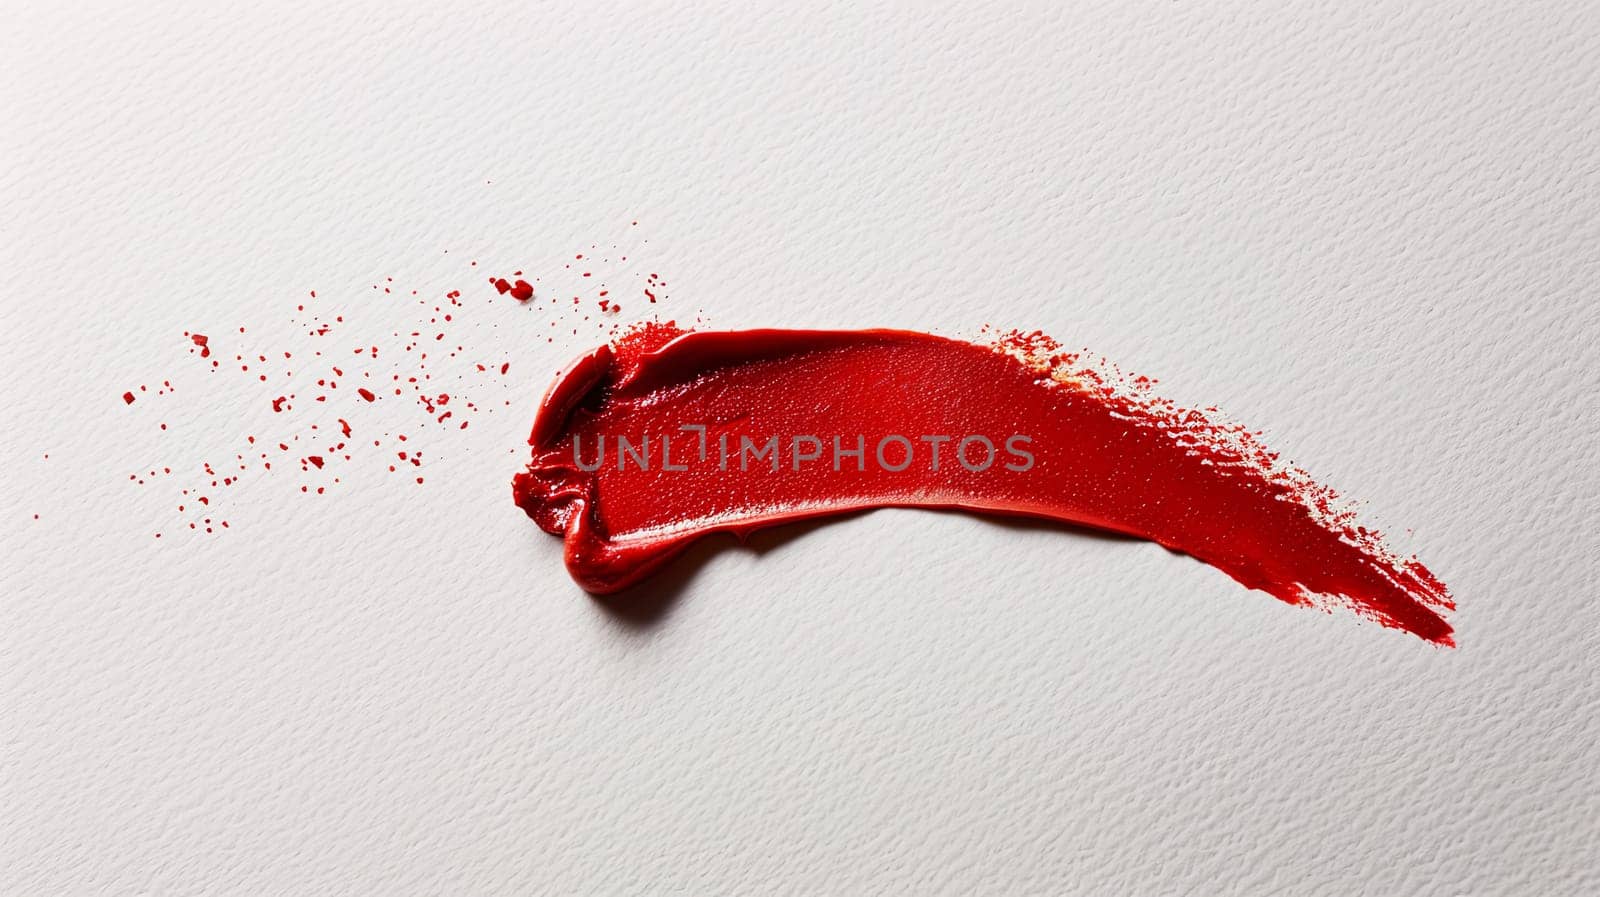 A vibrant red lipstick smudge contrasts against a pristine white surface, creating an artistic and lively scene.